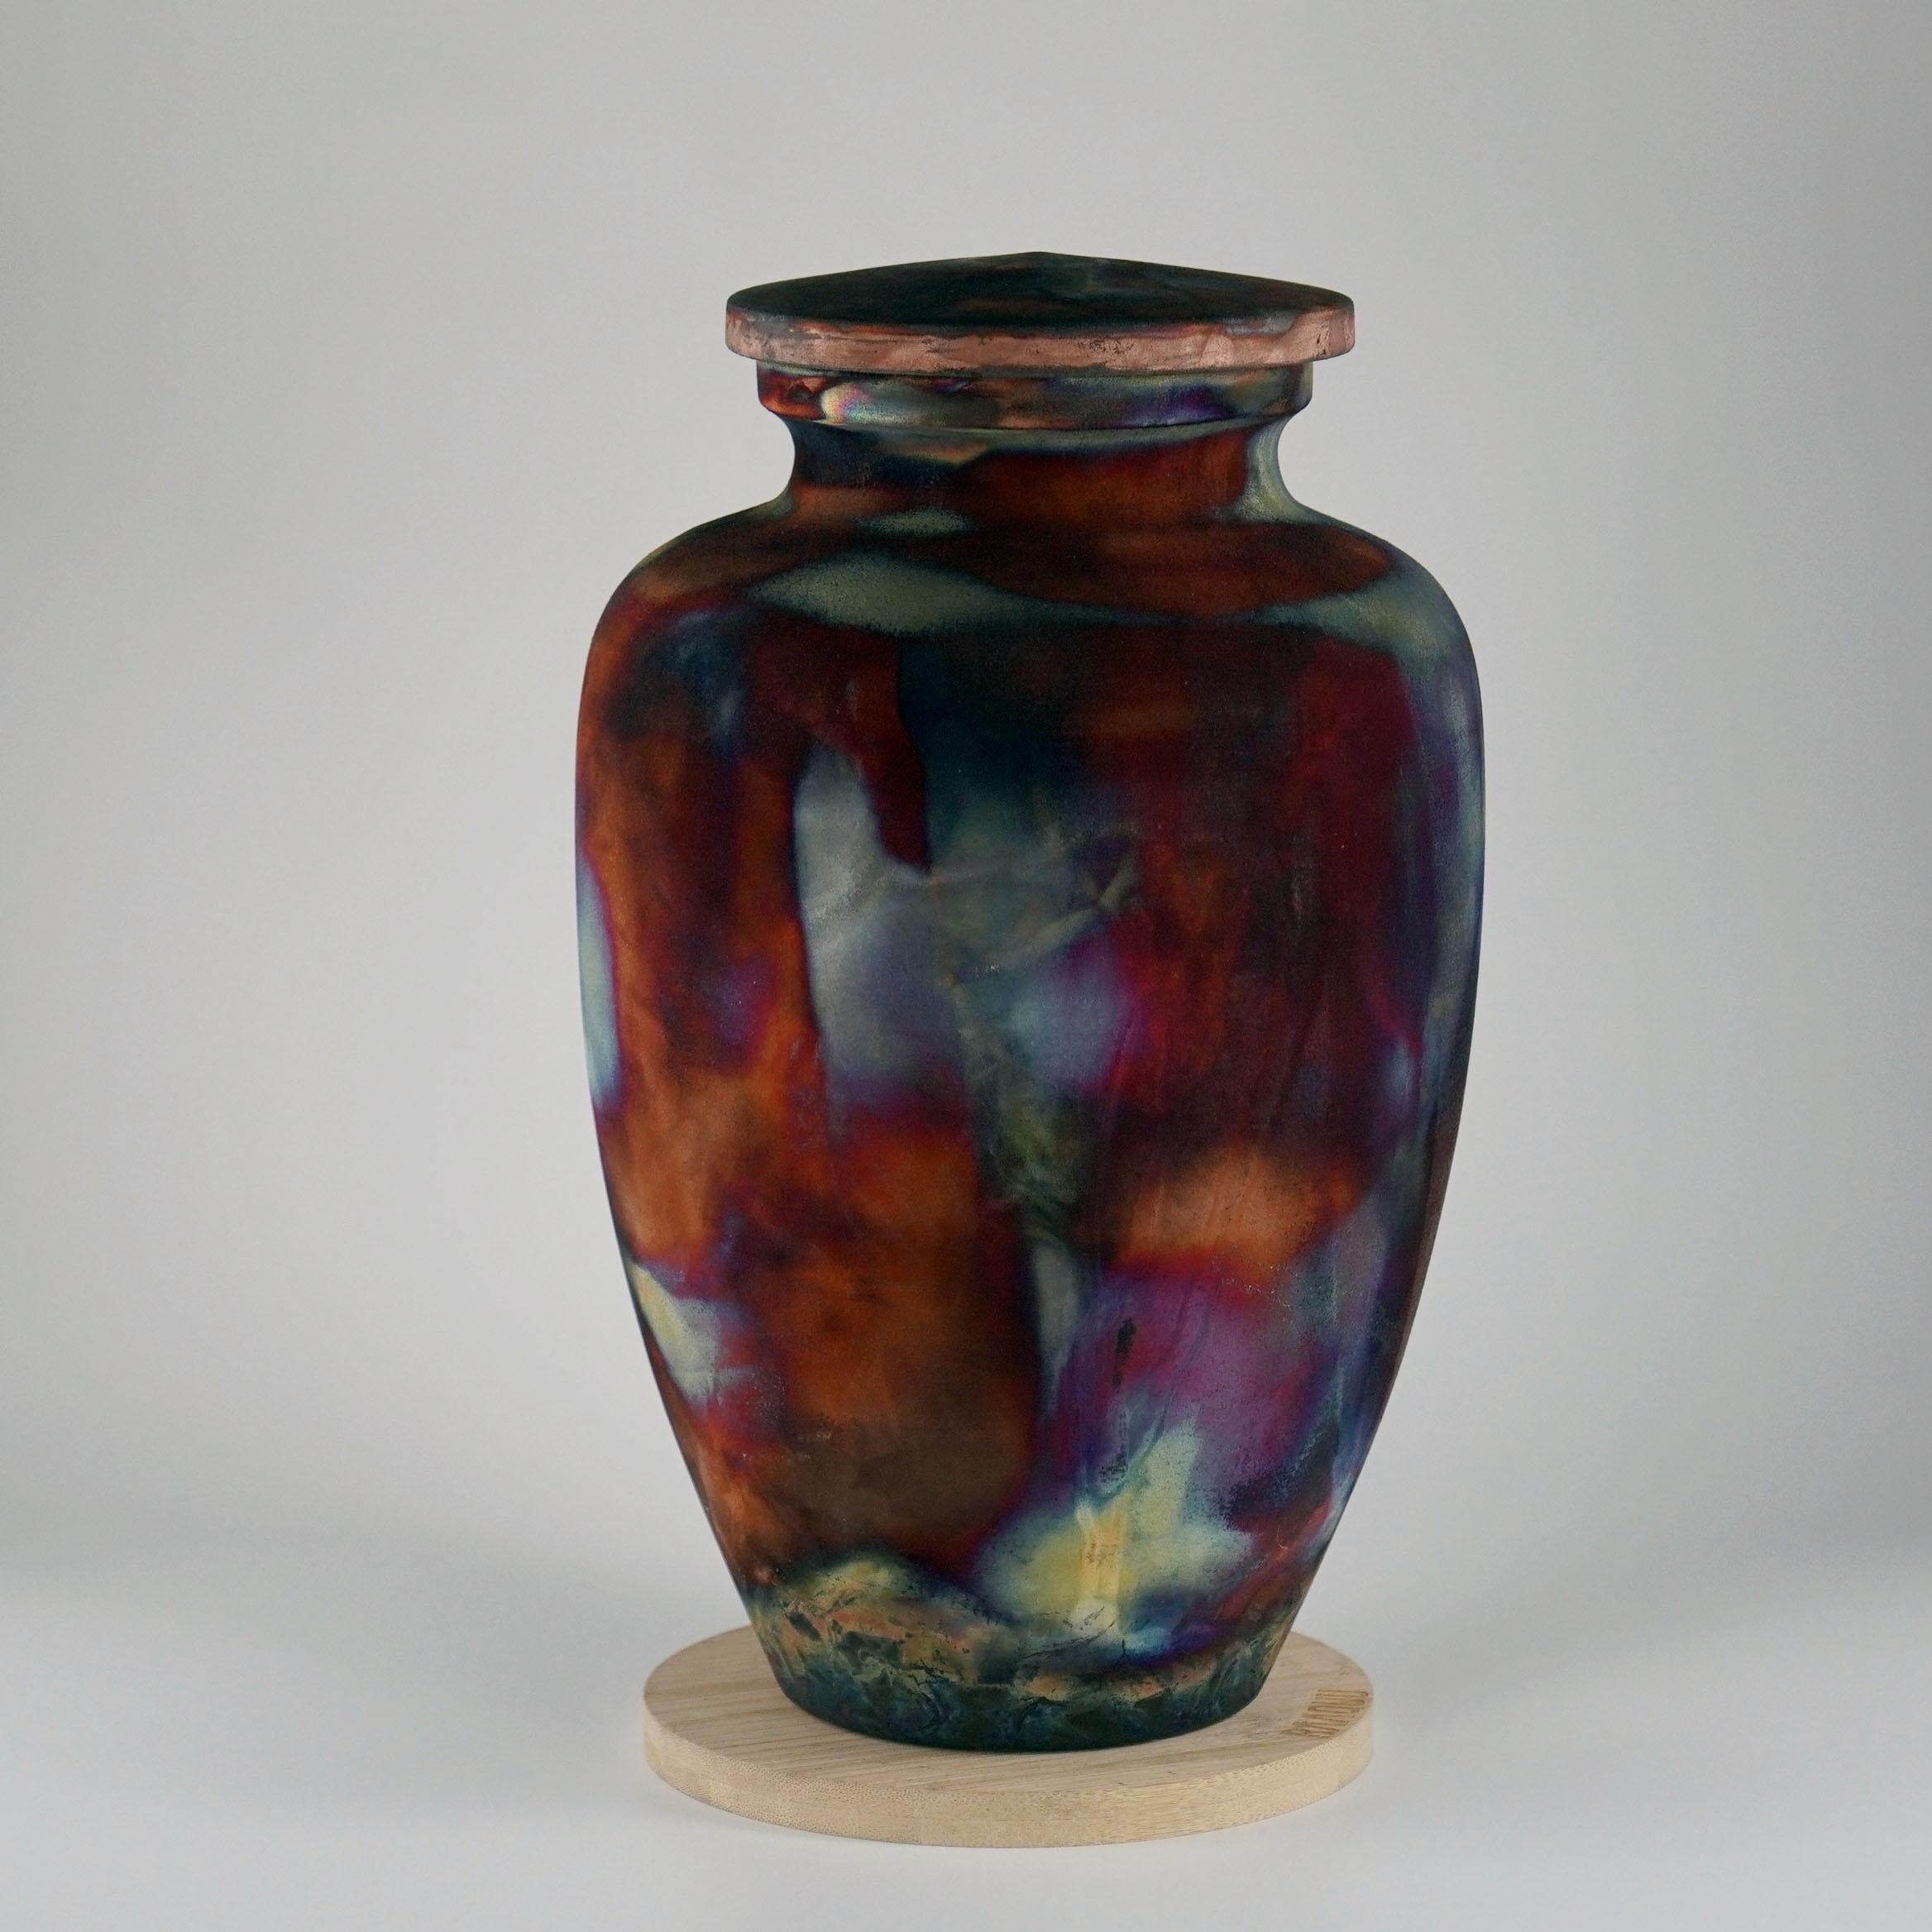 Omoide ~ (思い出) - Memories
 
The passing of a loved one will always be a defining moment in a person's life. The Omoide Urn is a one of a kind ceramic piece that offers a focal point to reminisce on the memories left behind by your loved one.
